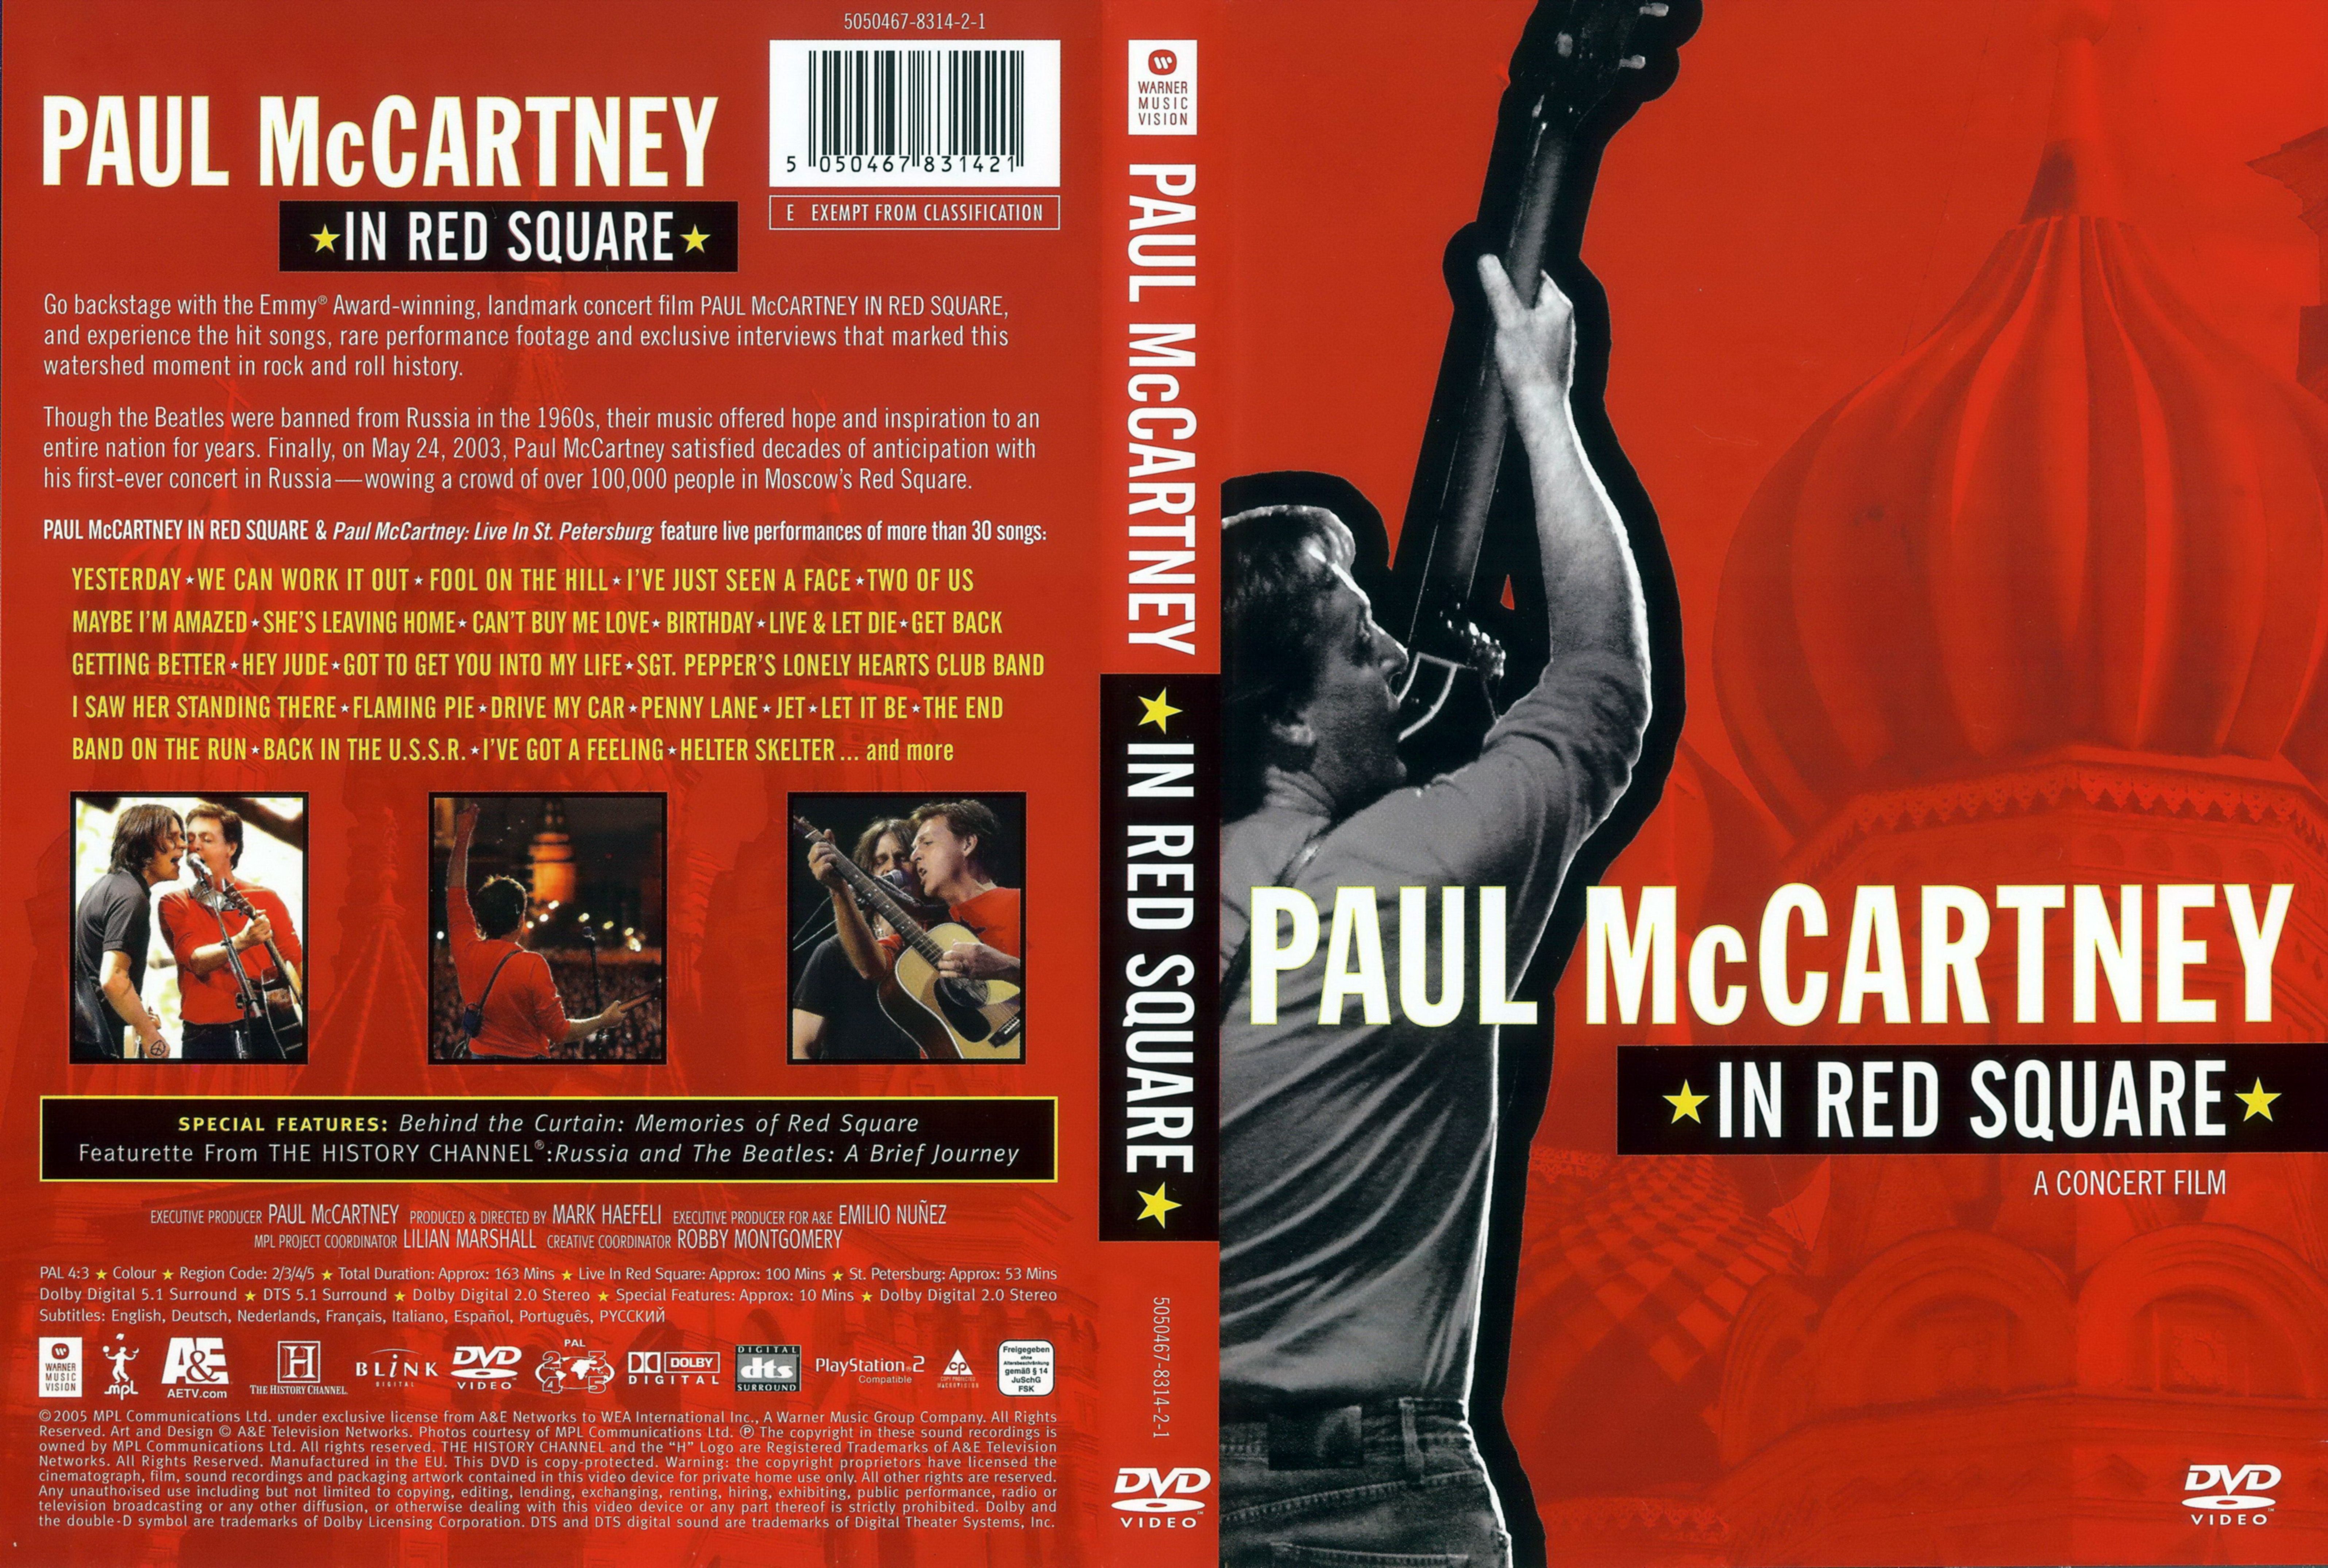 Jaquette DVD Paul McCartney In red square